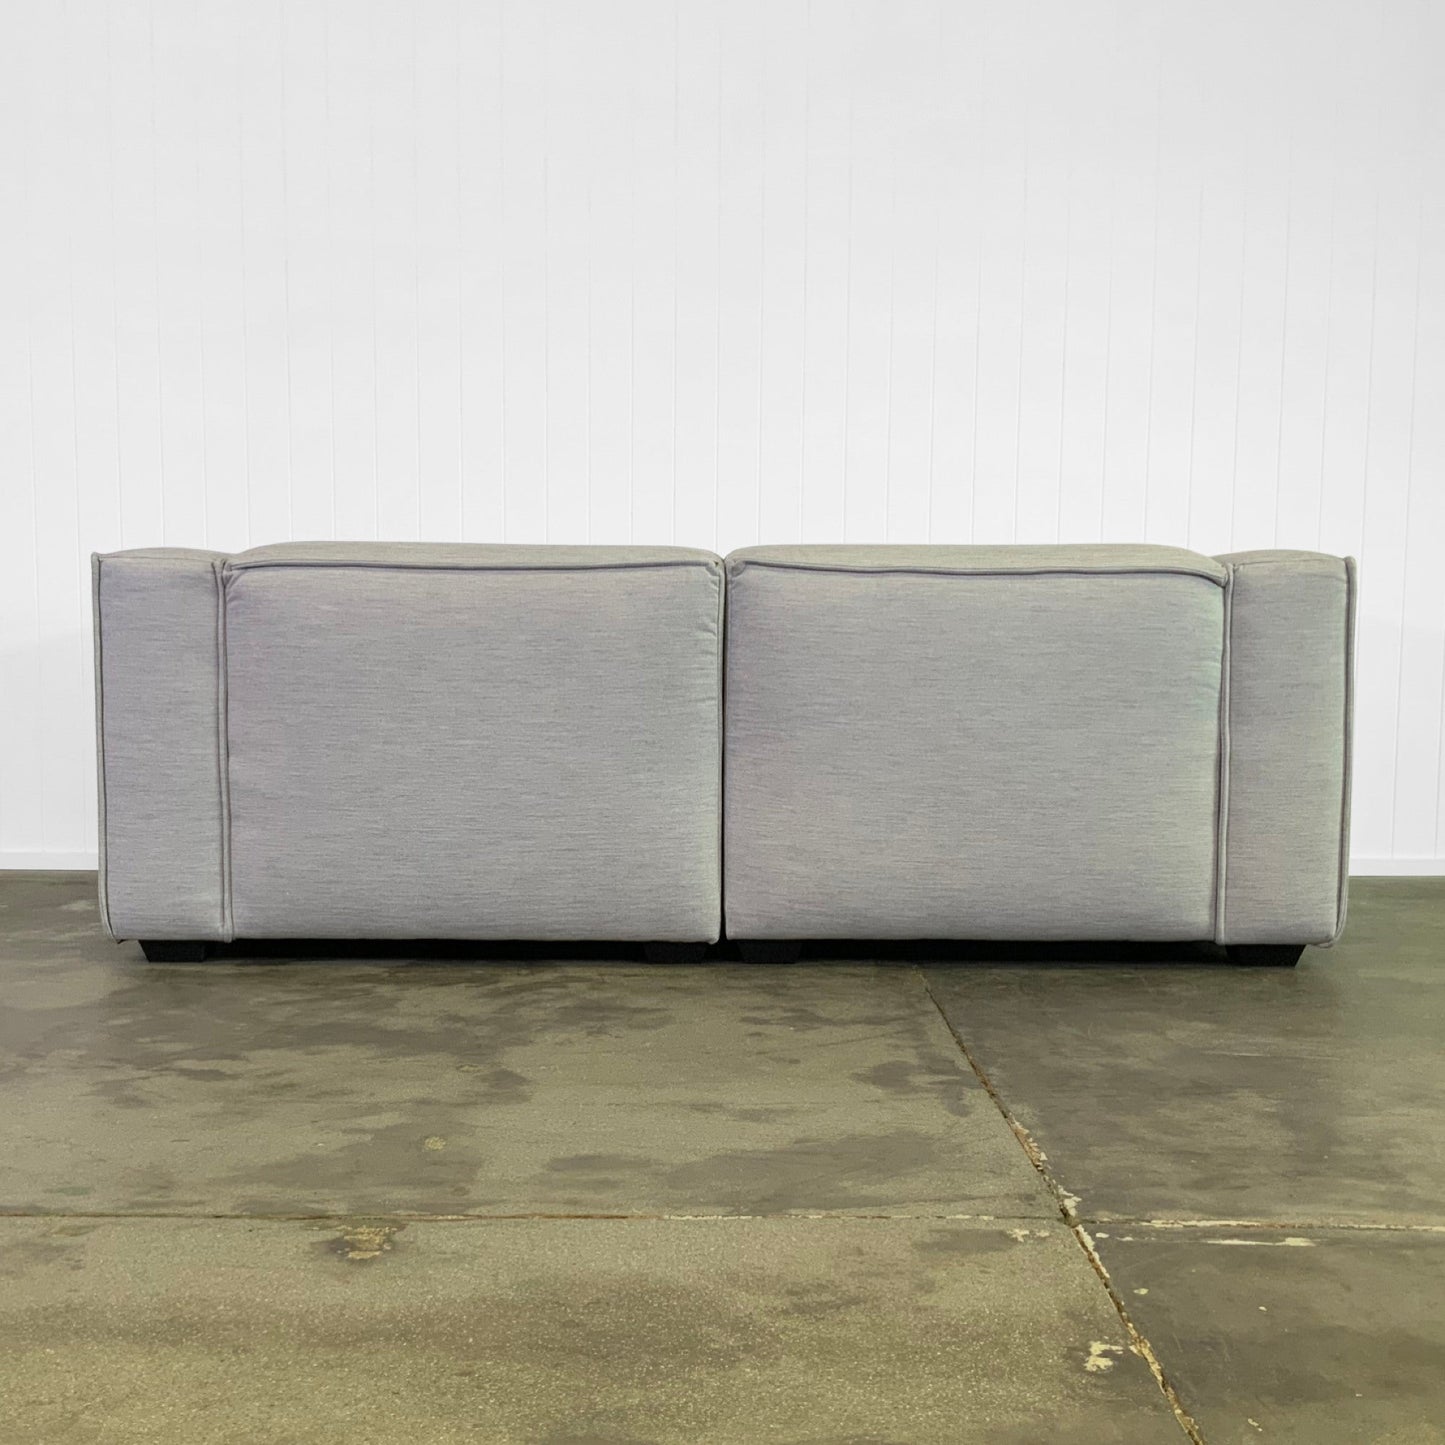 Mercury Sofa | Value Range Fabrics Multiple Sizes And Options Available Made To Order In Wa